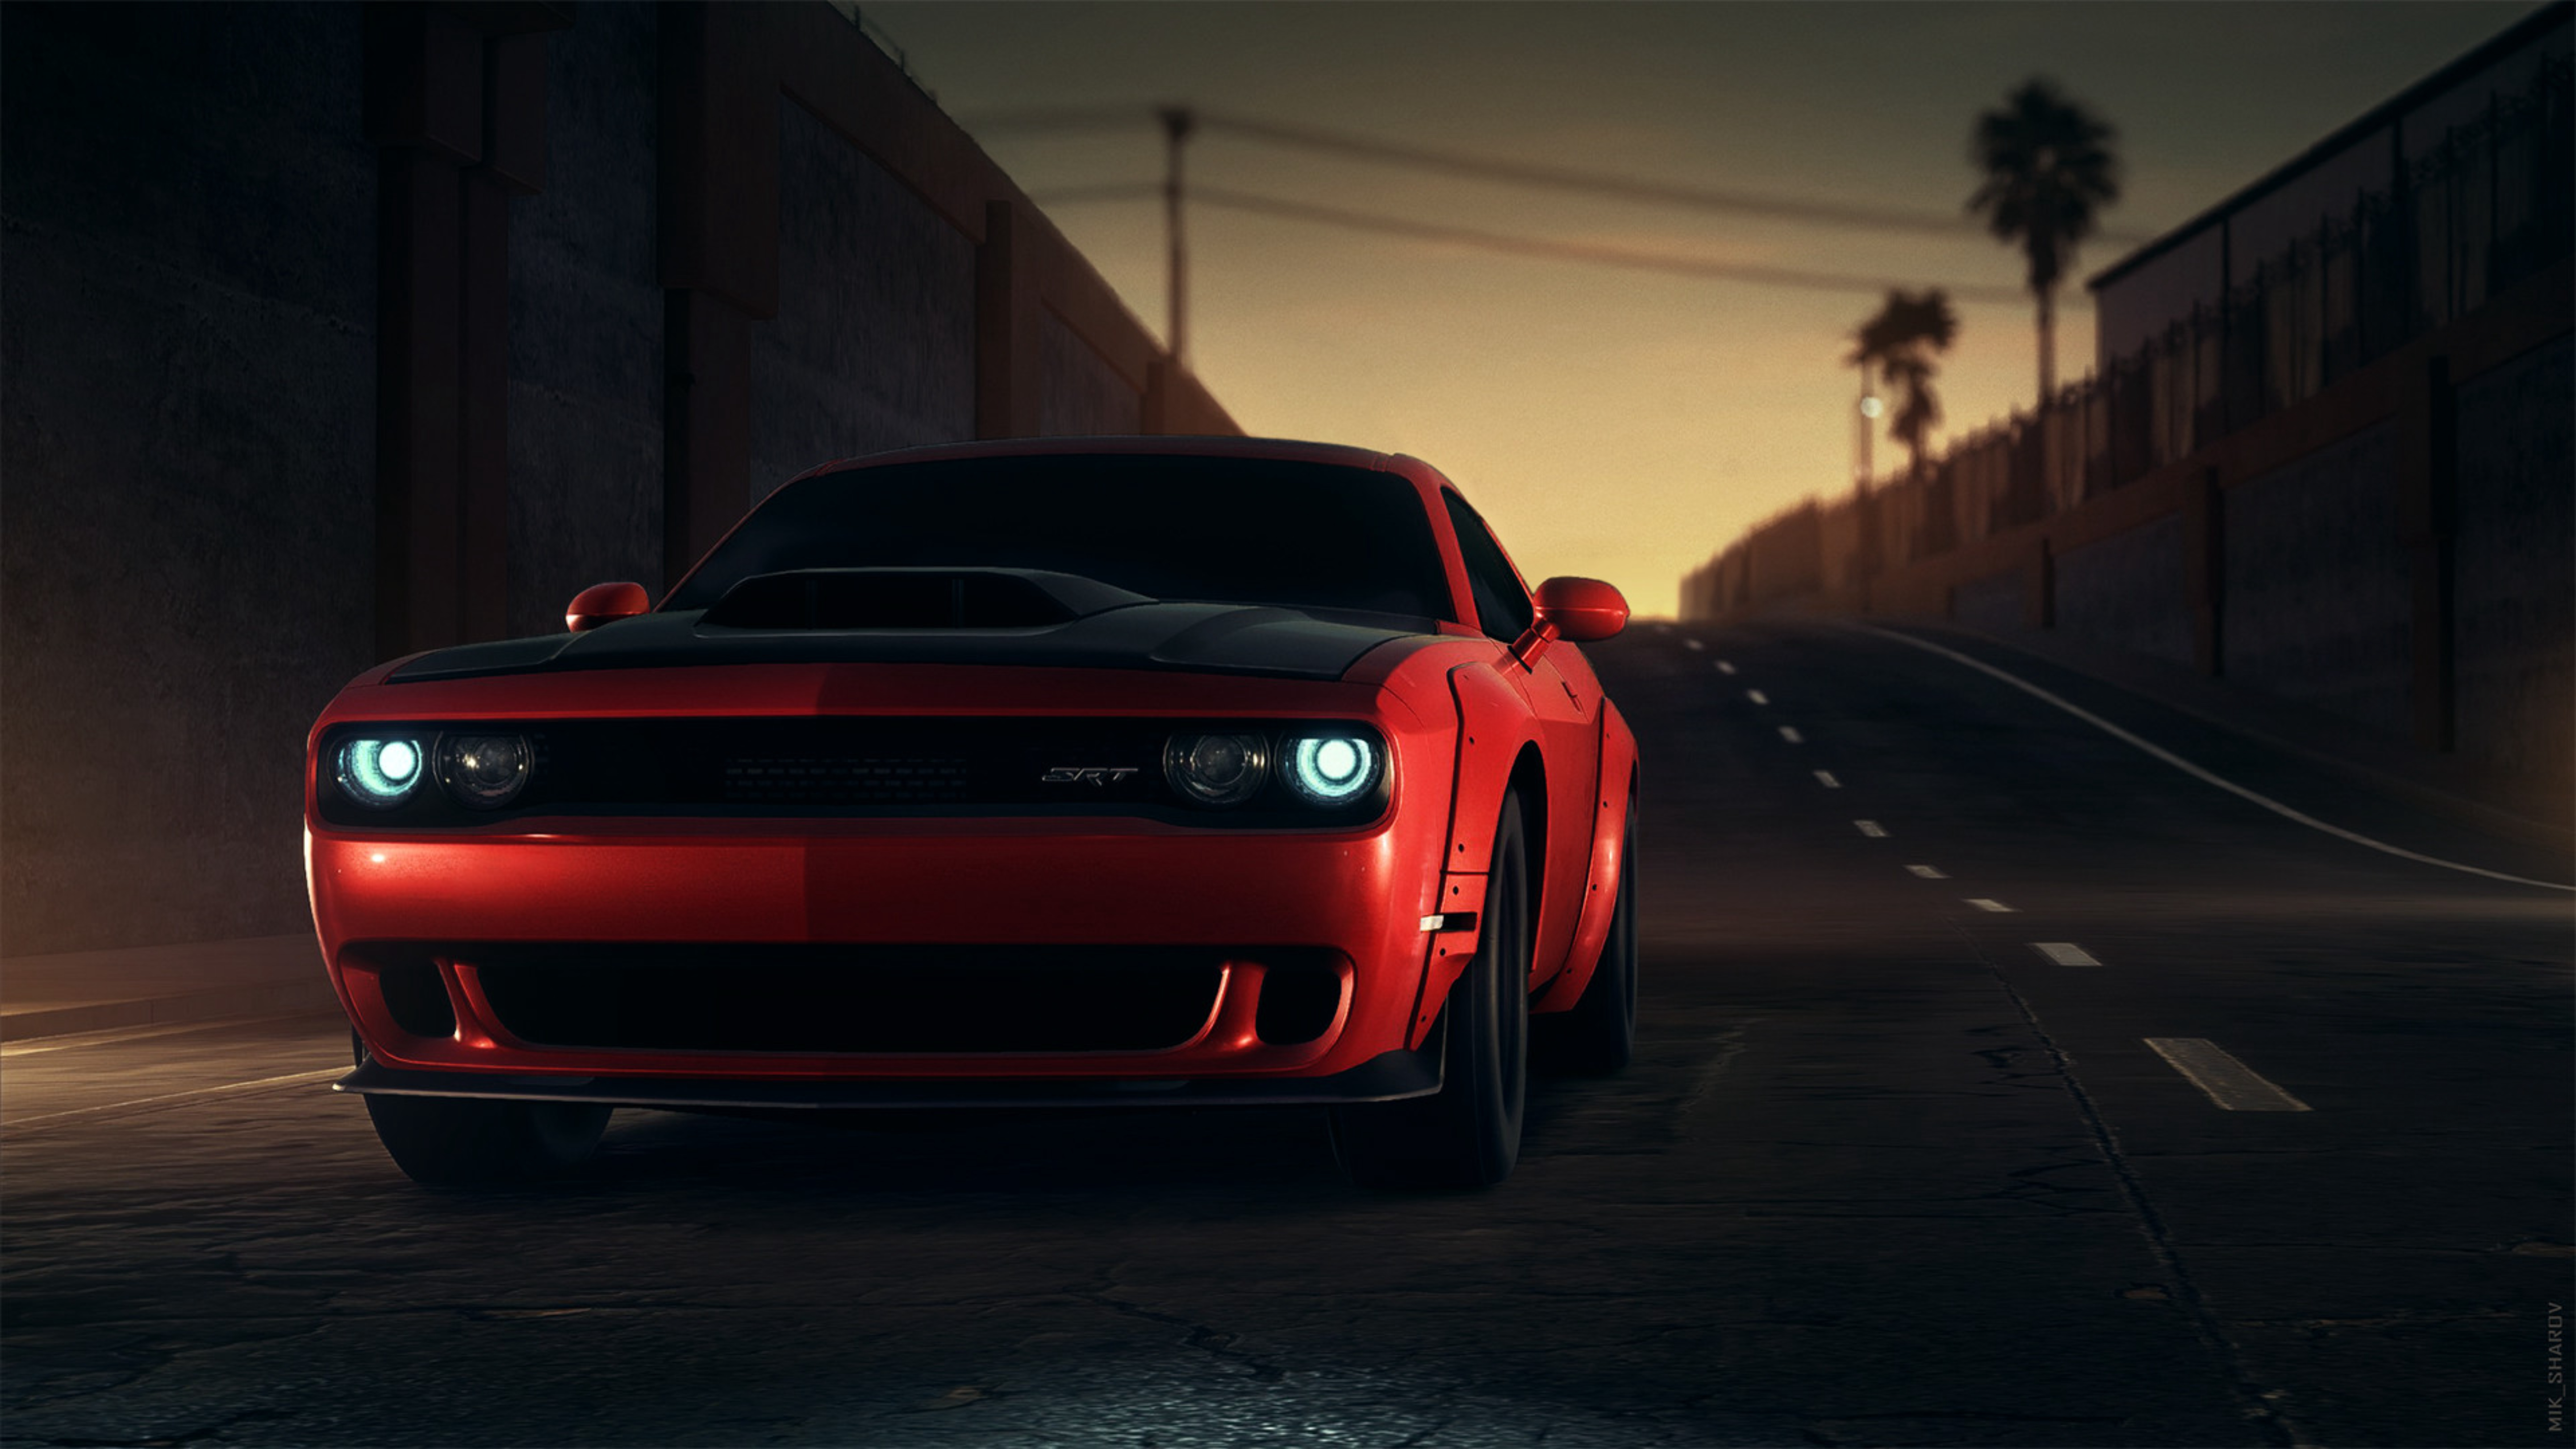 cars, front view, headlights, sports car, lights, dodge srt, dodge, red, sports phone background